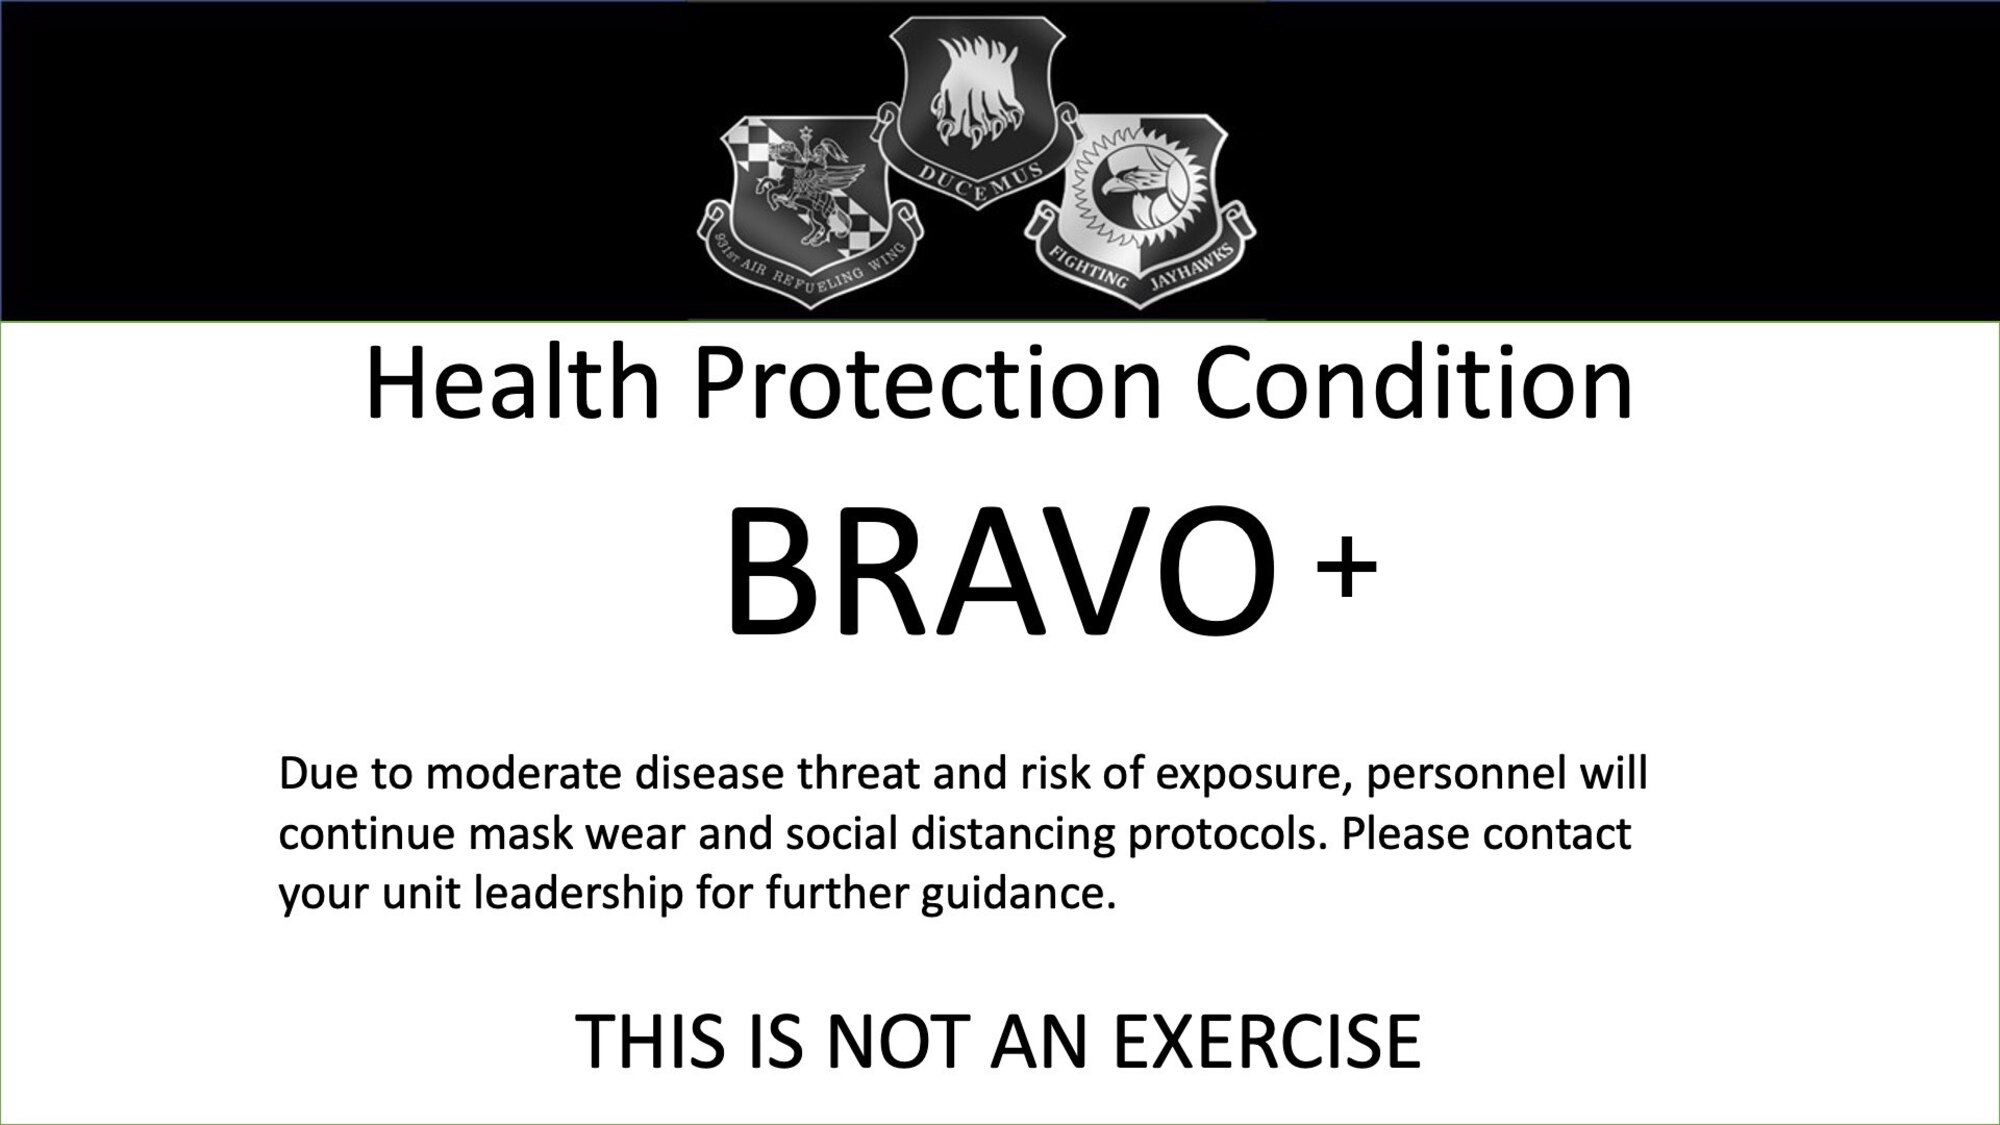 McConnell has changed to Health Protection Condition Bravo+, effective immediately.